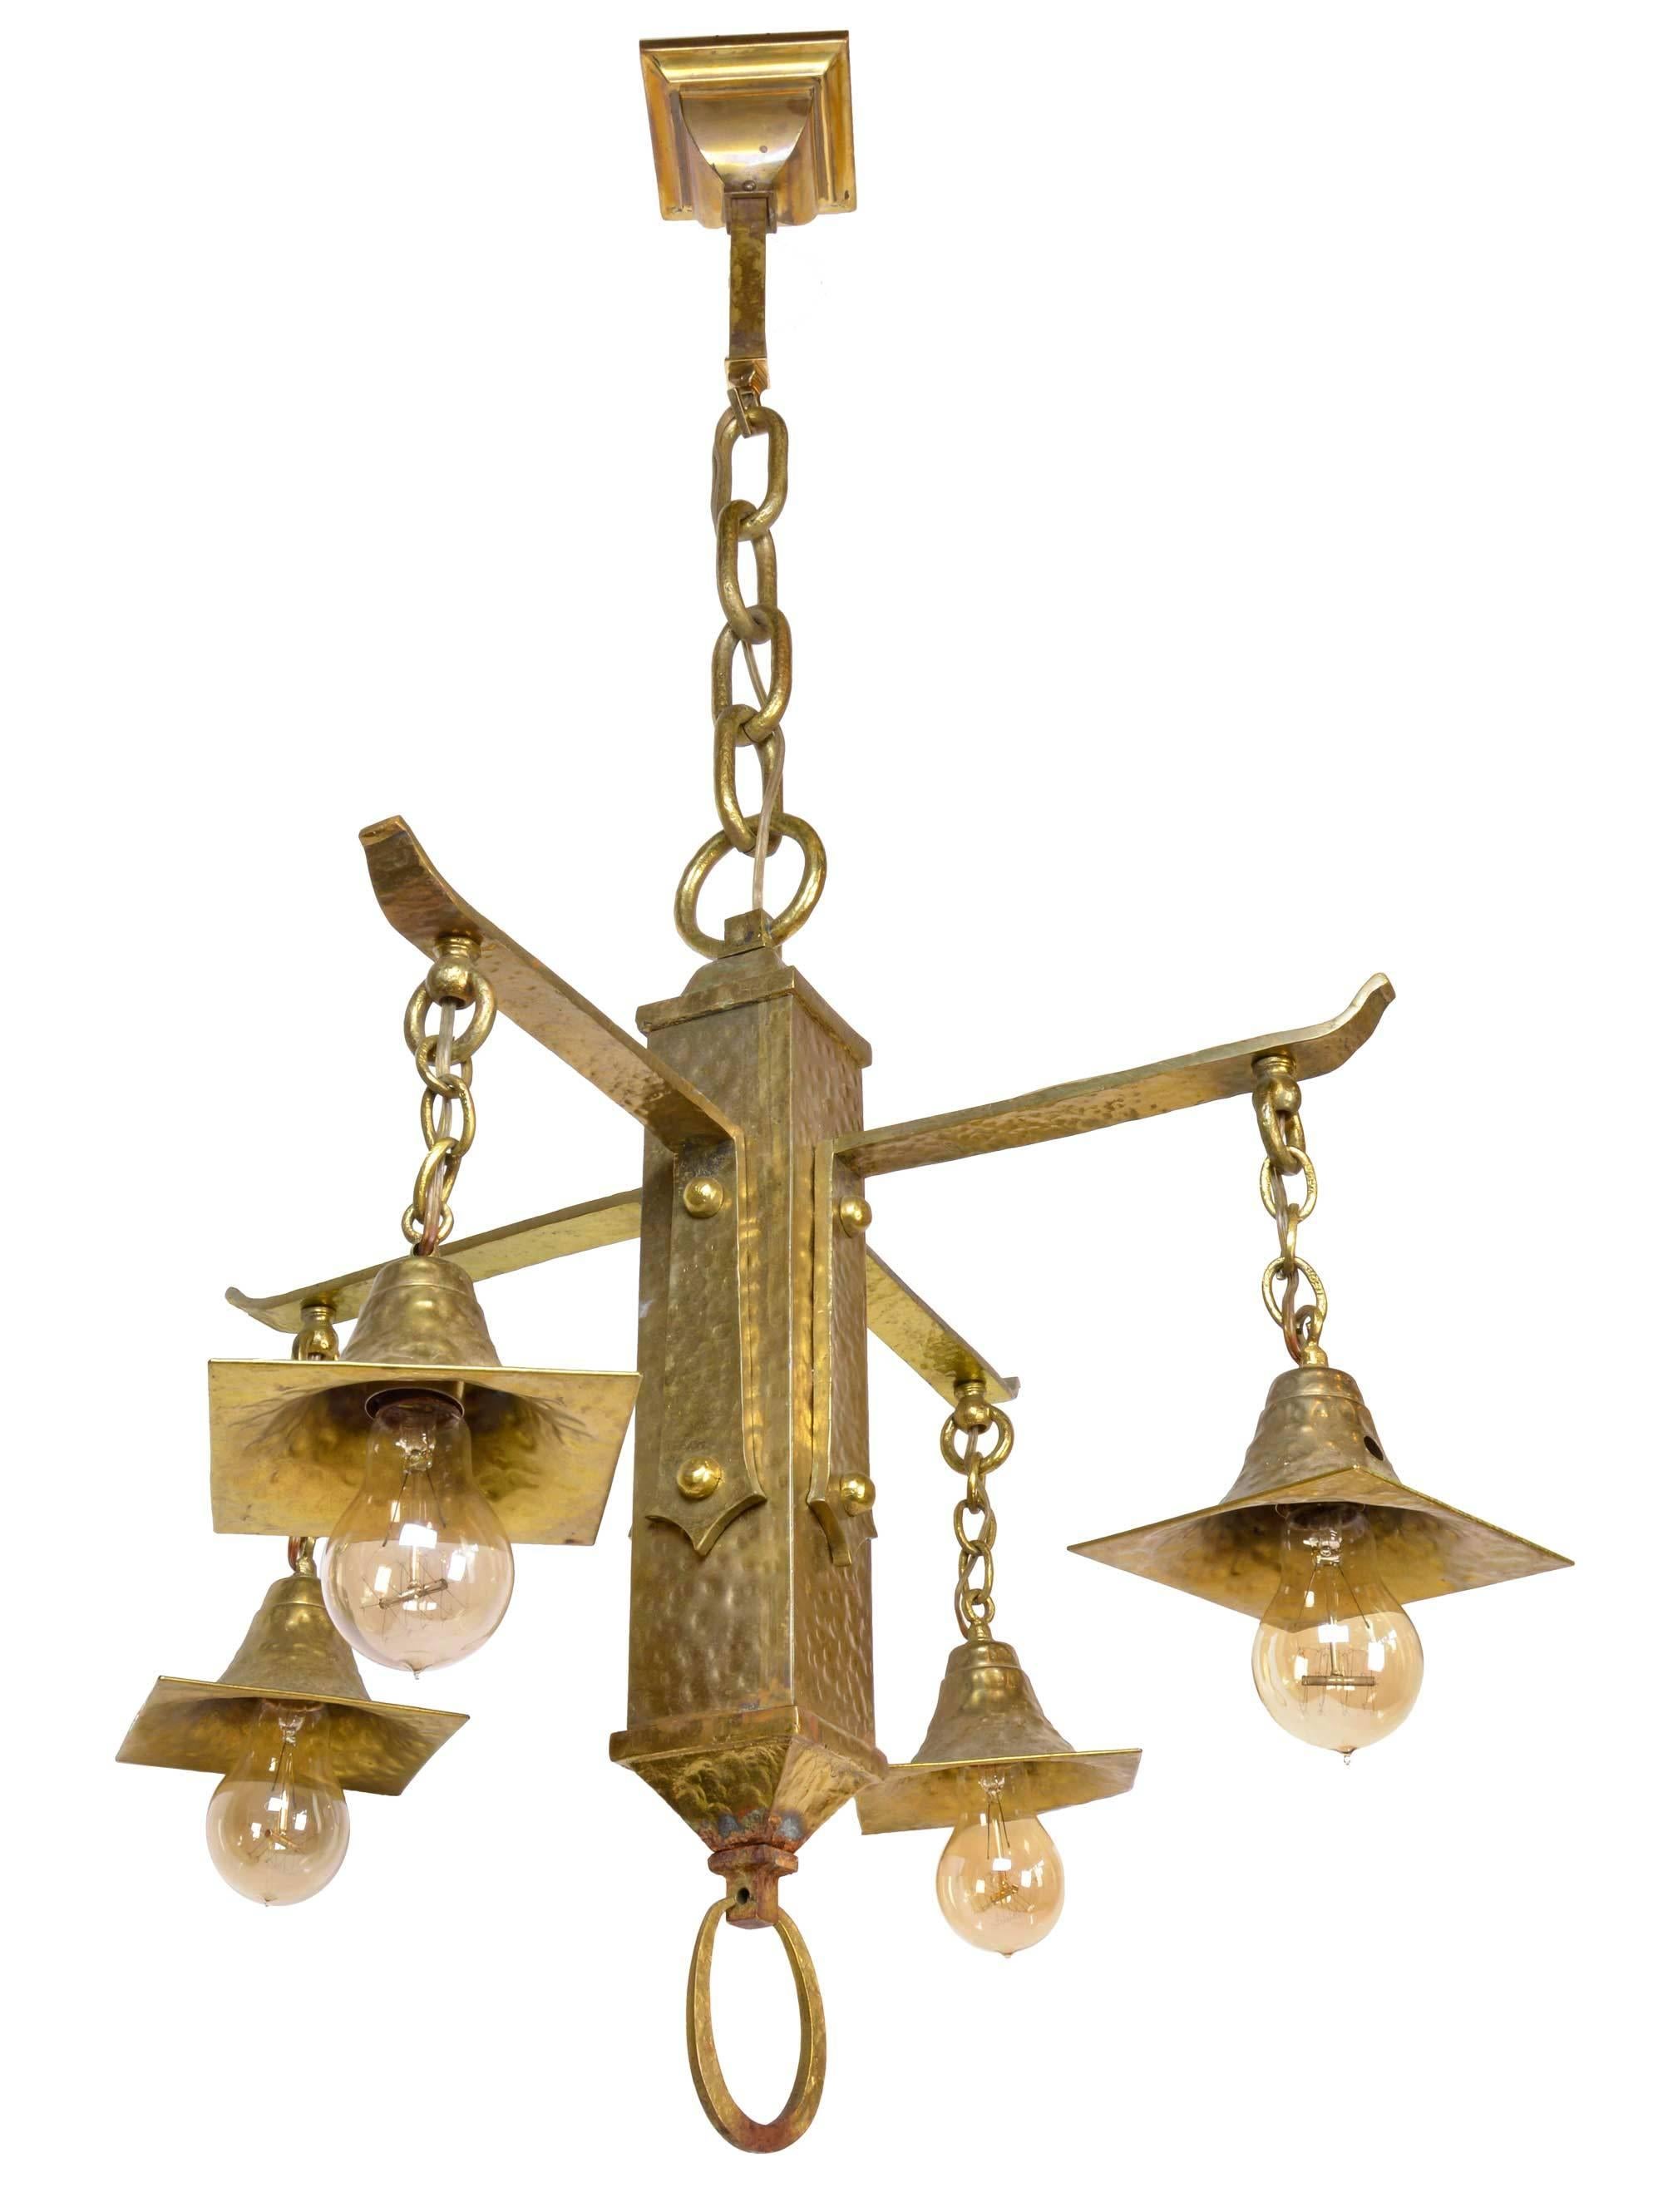 This stunning hammered brass Arts & Crafts chandelier features four cast brass arms, a heavy chain and a handsome, elongated loop finial. Made circa 1915, with a polished finish, it is truly a one of a kind piece! 

We find that early antique